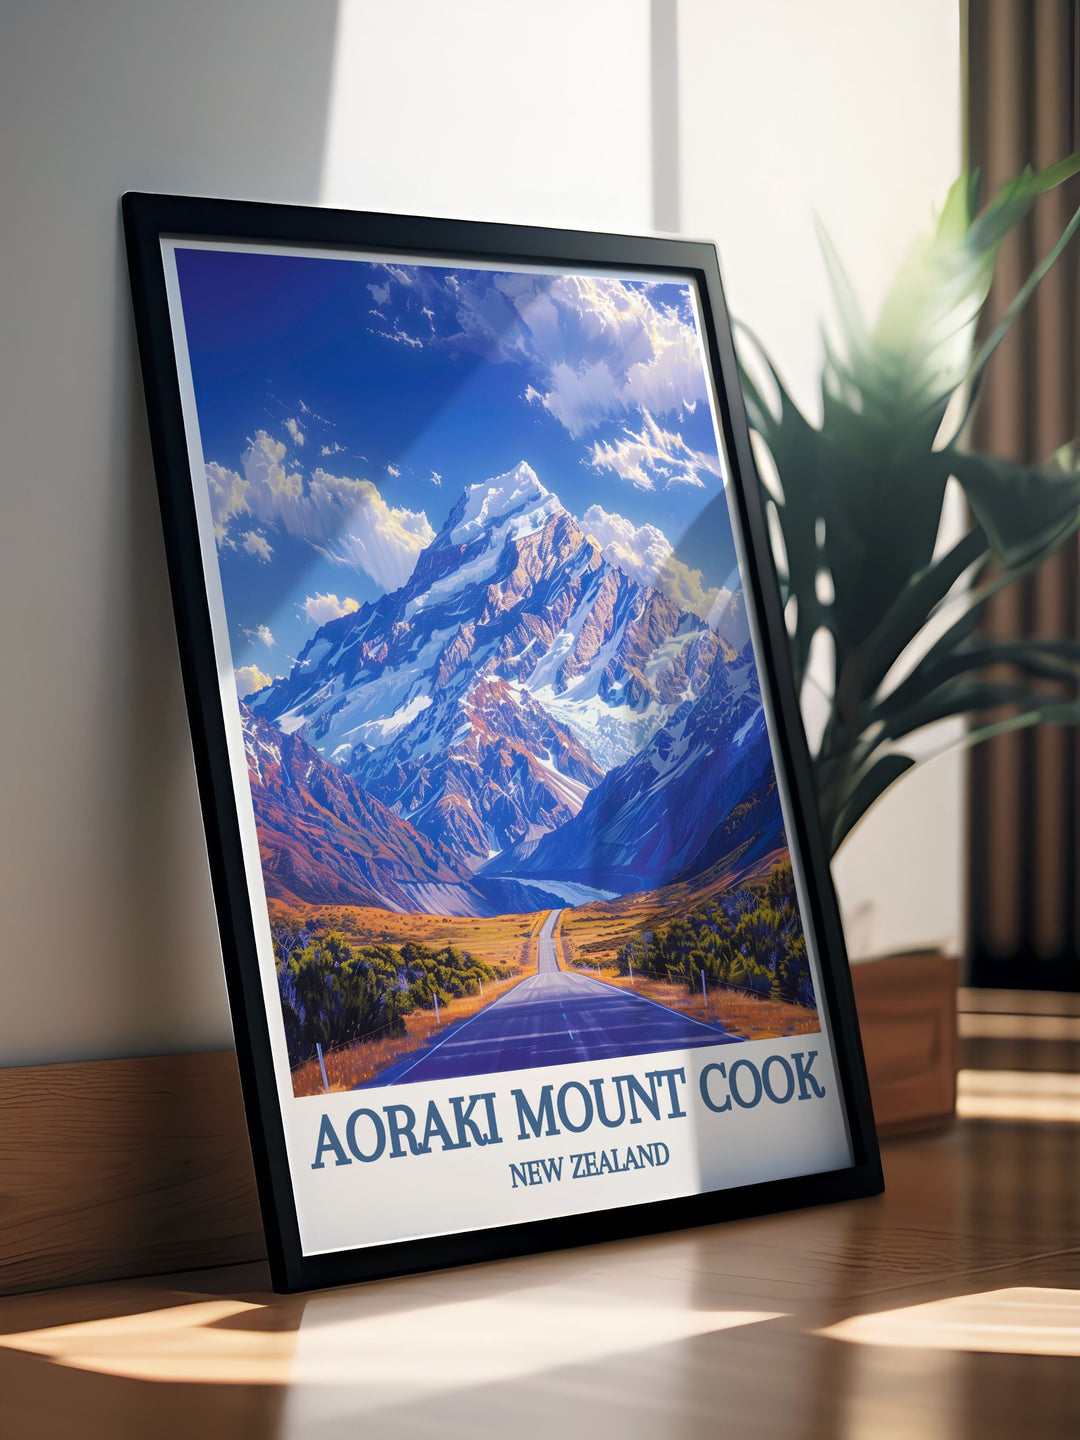 Canvas art of Mount Cooks rugged terrain, offering a vivid depiction of New Zealands natural beauty and enhancing any home or office decor.